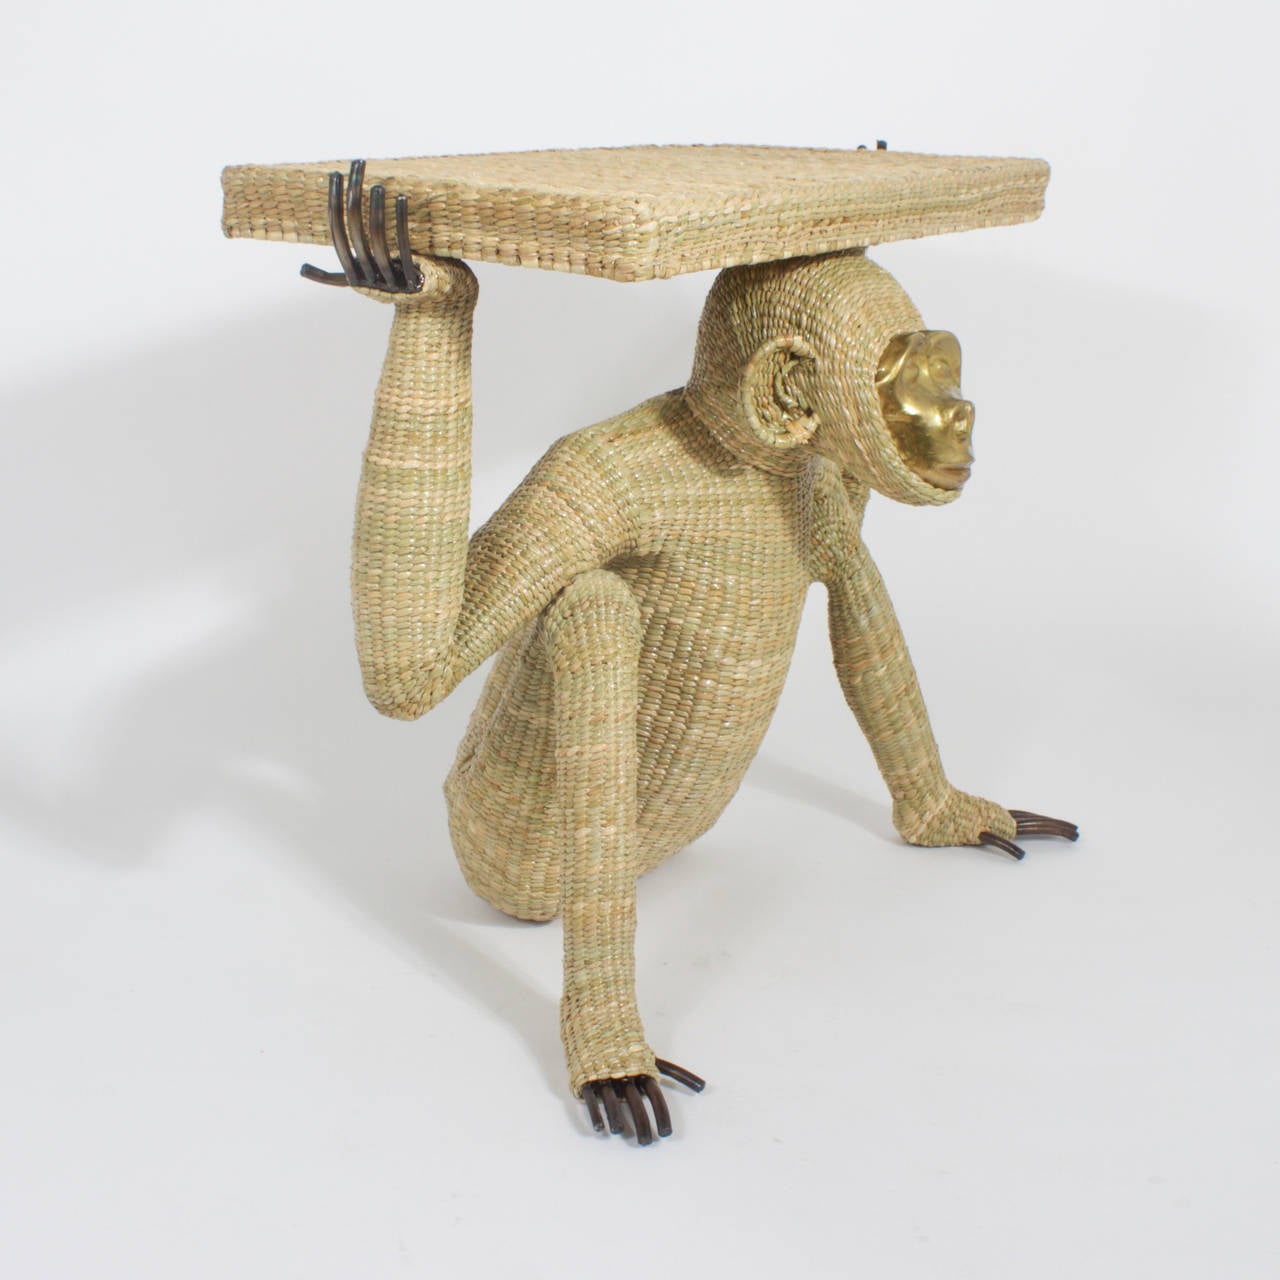 Mario Torres monkey or chimpanzee console constructed with a metal frame expertly wrapped in wicker or reed. Having a pressed brass face and exposed fingers and toes. This would fit right in to a modern interior or be just that right touch of whimsy